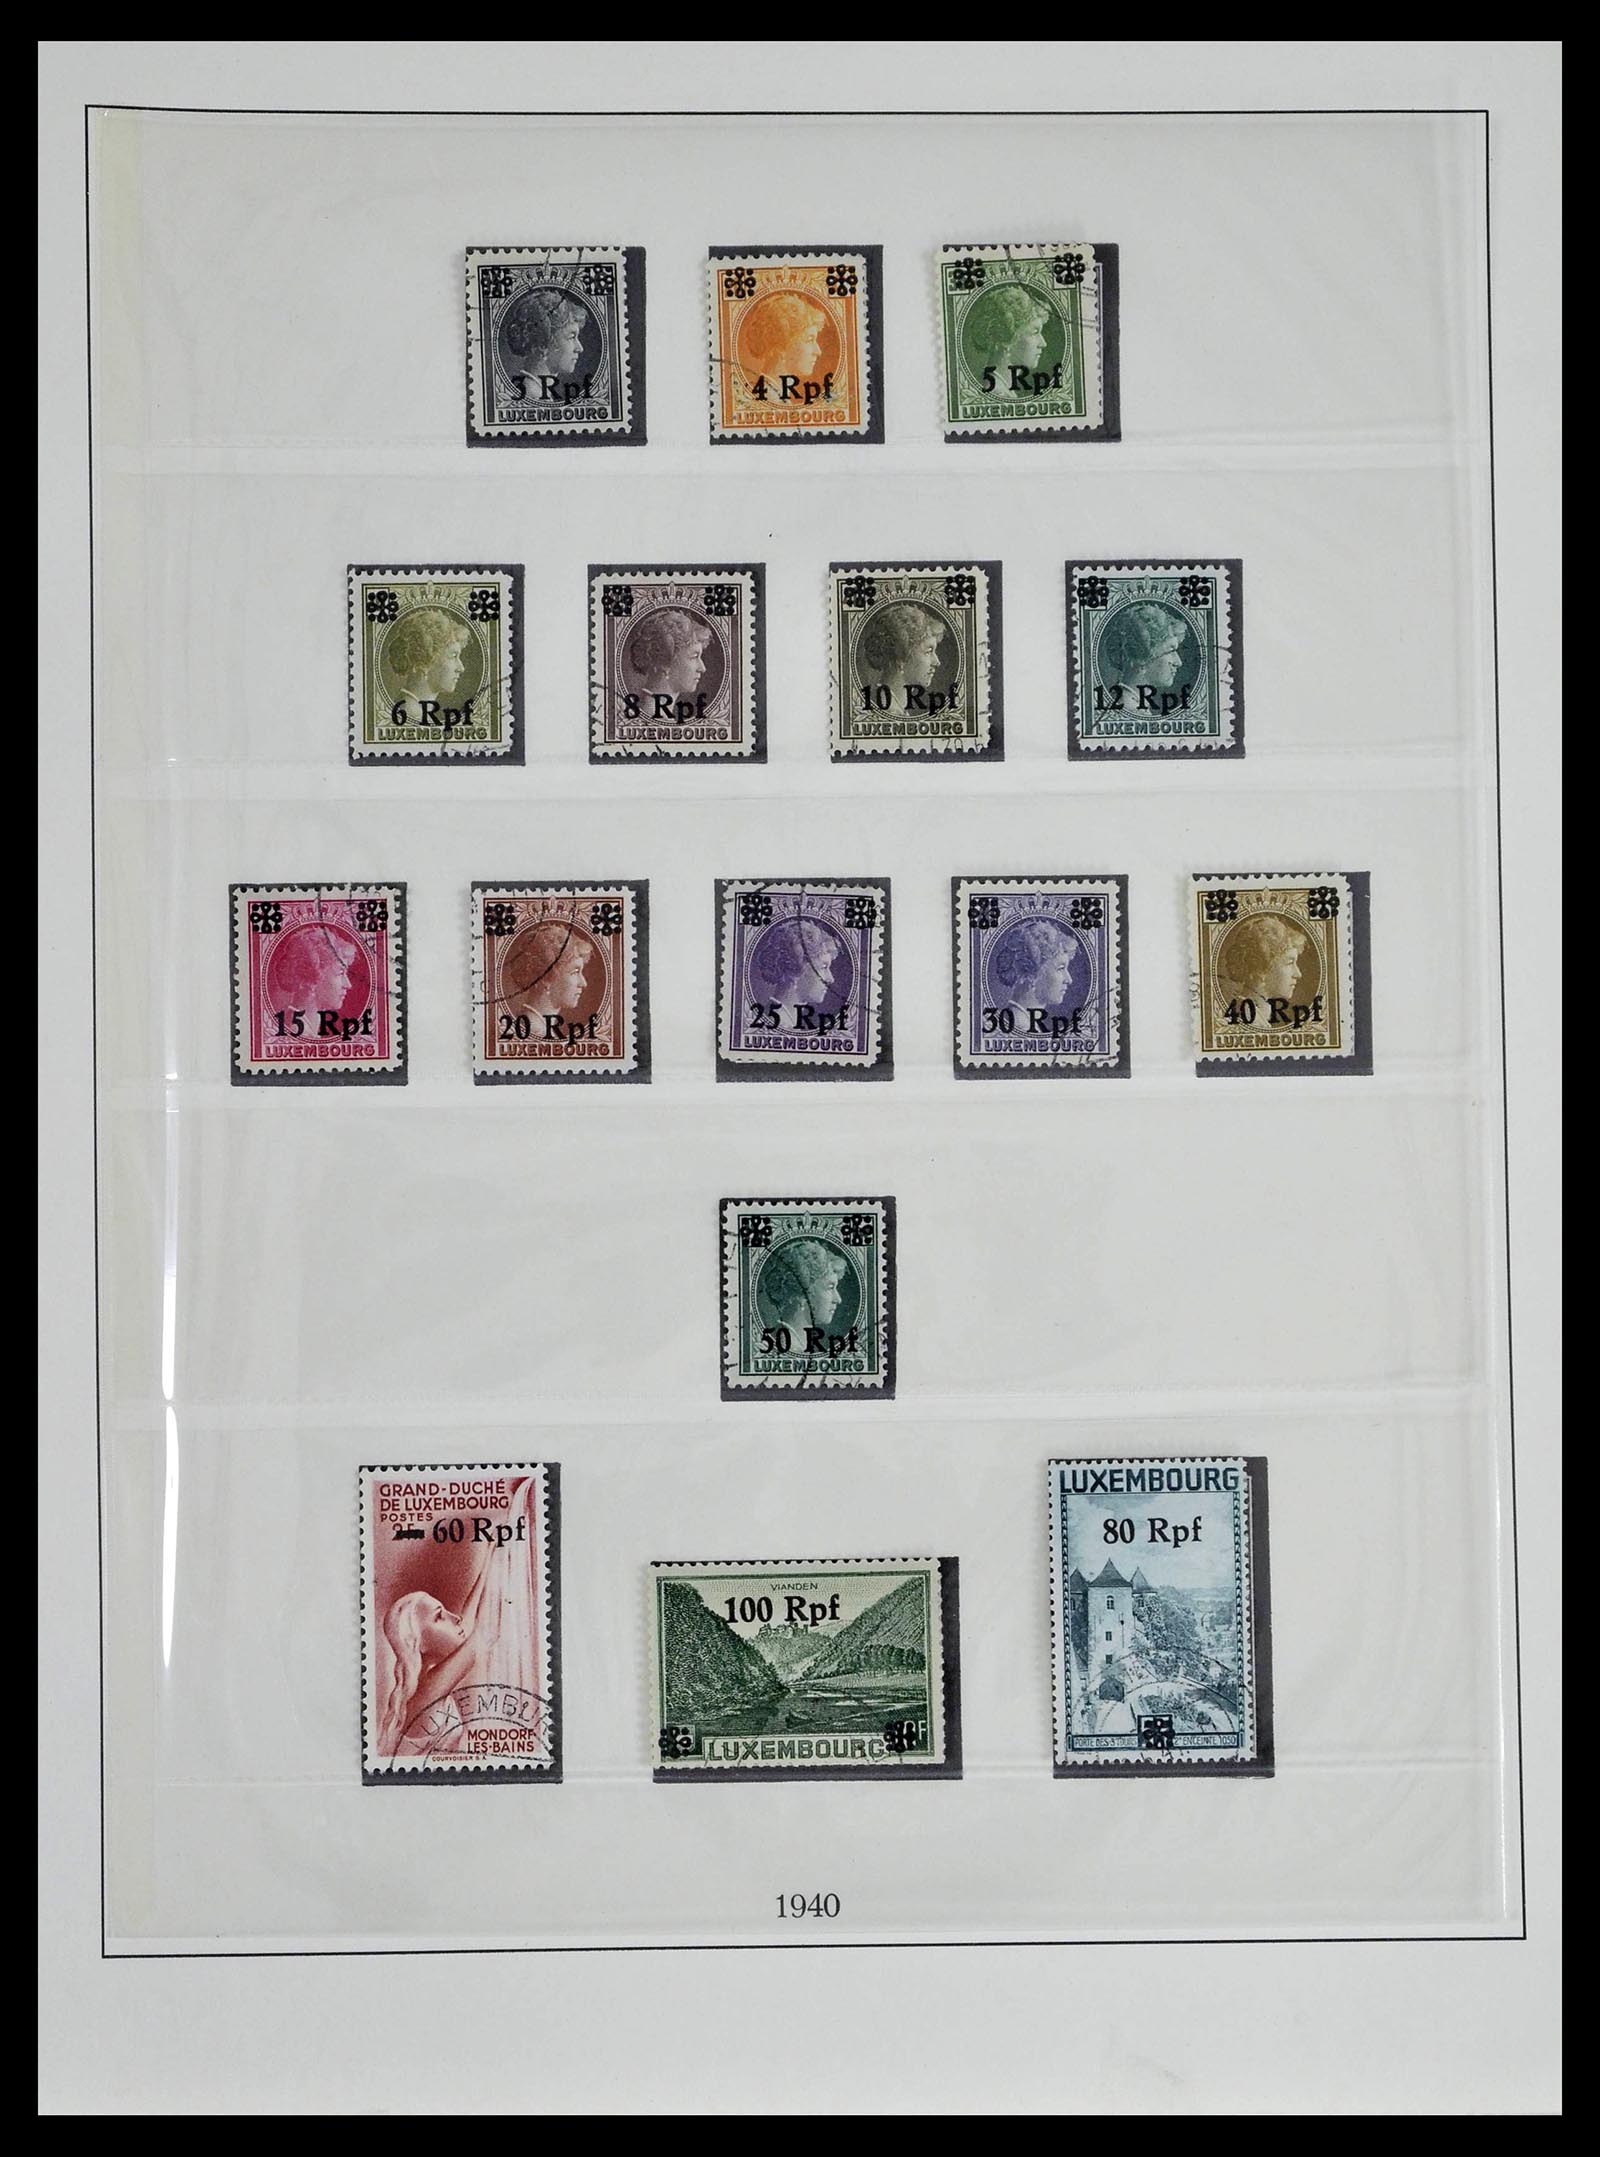 39396 0034 - Stamp collection 39396 German occupation WW II 1939-1945.